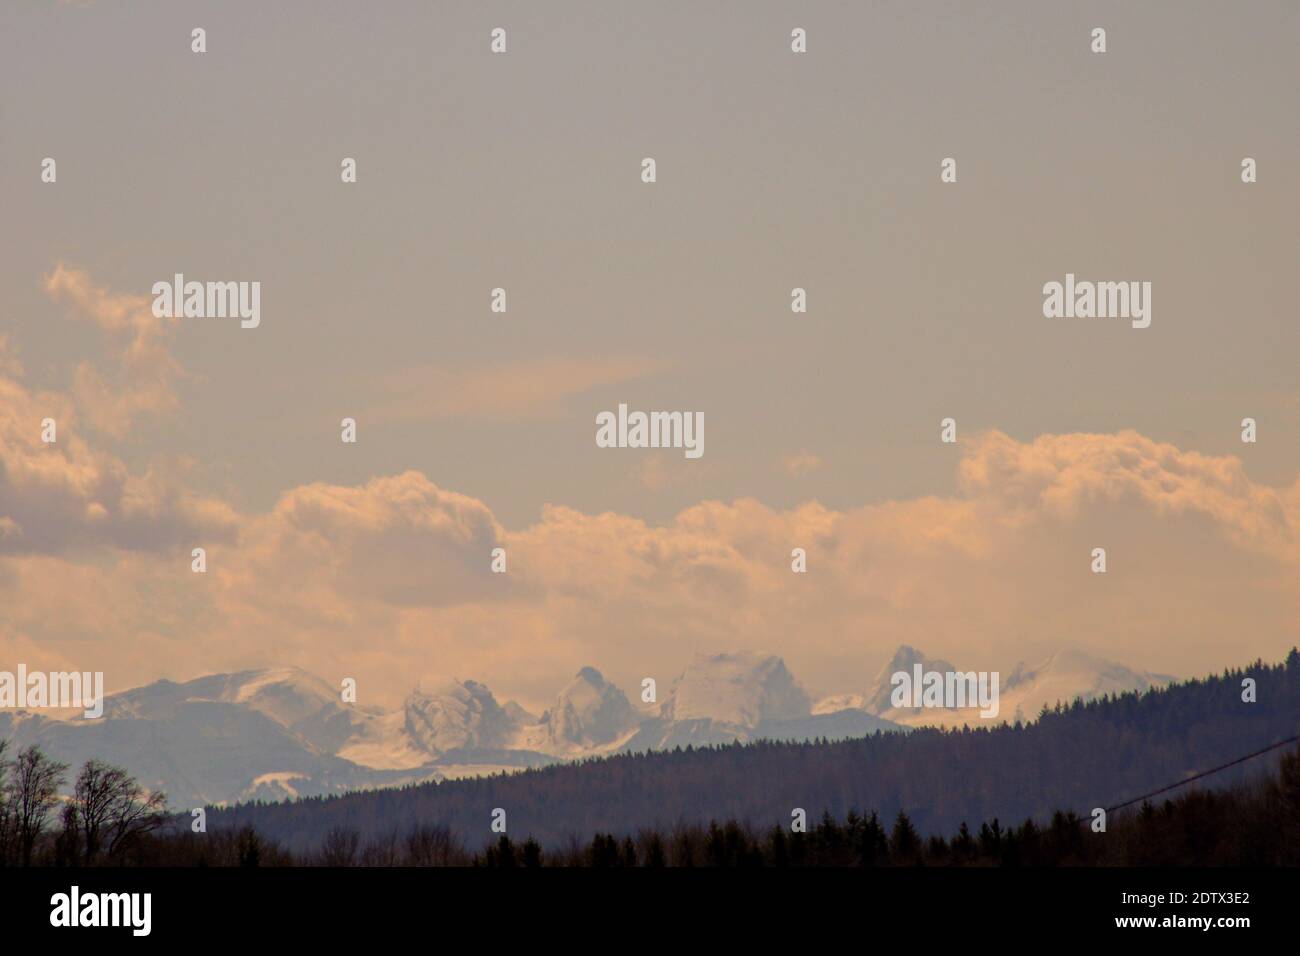 Scenic View Of Mountains Against Sky During Sunset Stock Photo